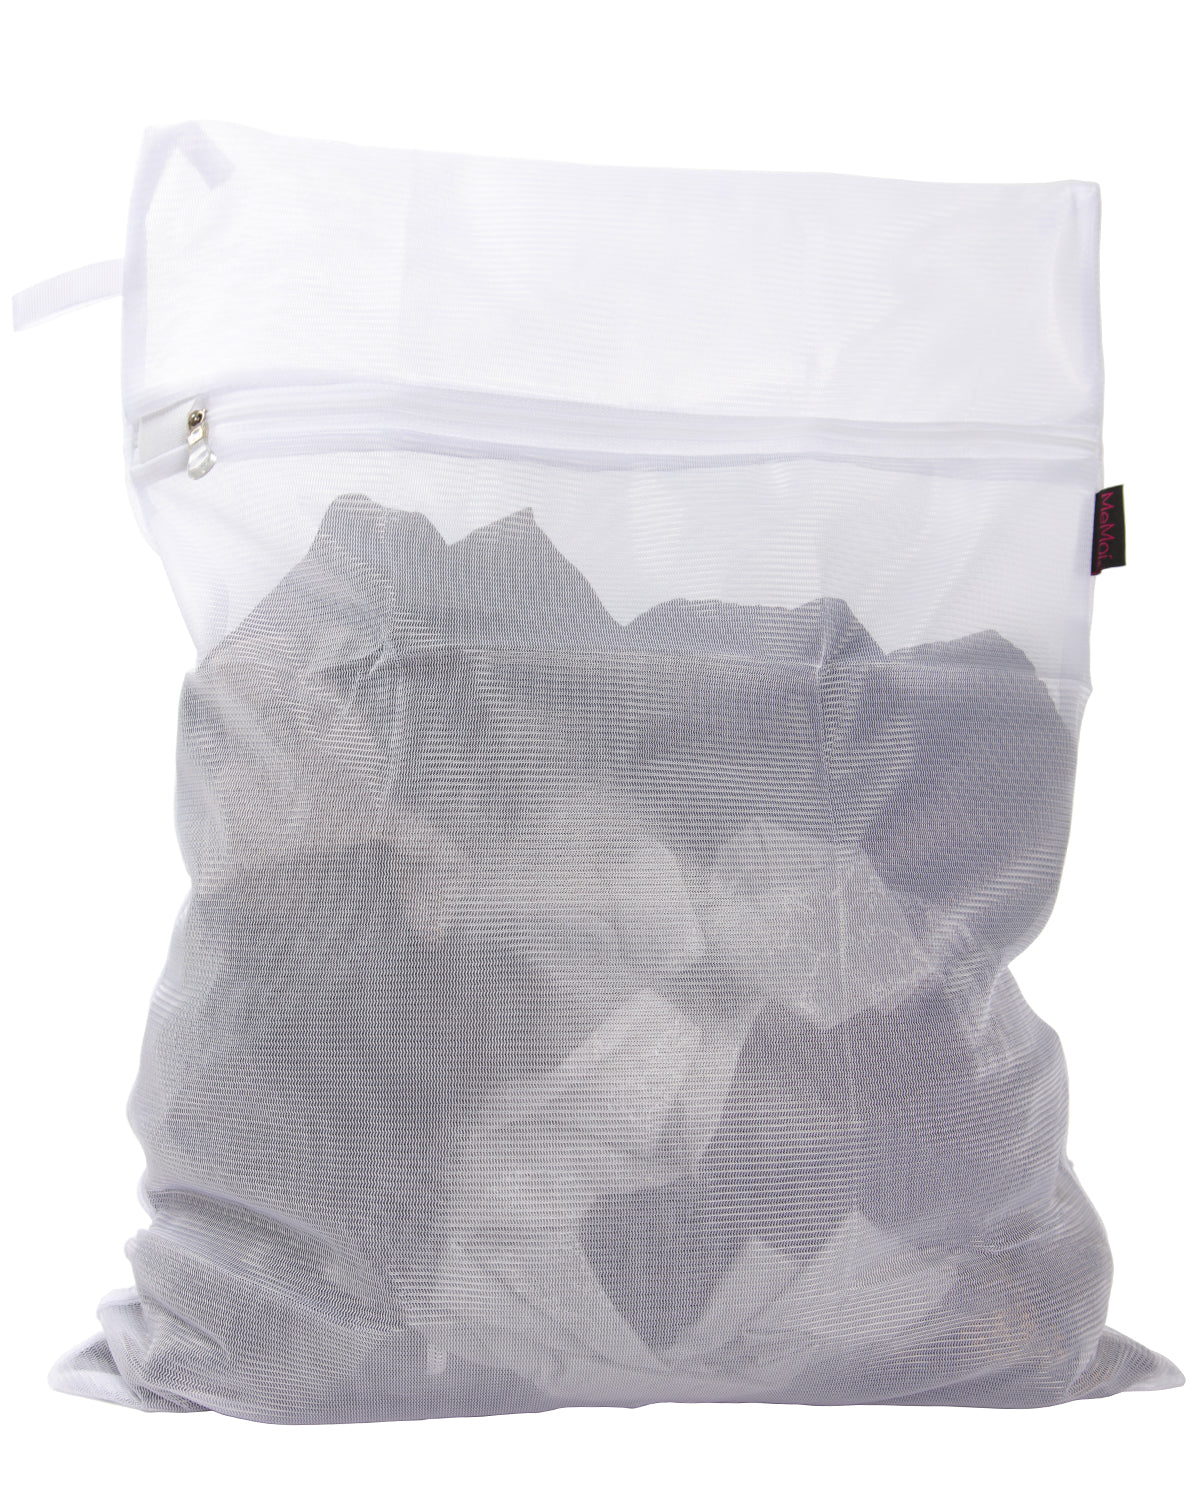 IMPORTANCE OF MESH LAUNDRY BAGS FOR WASHING MACHINE